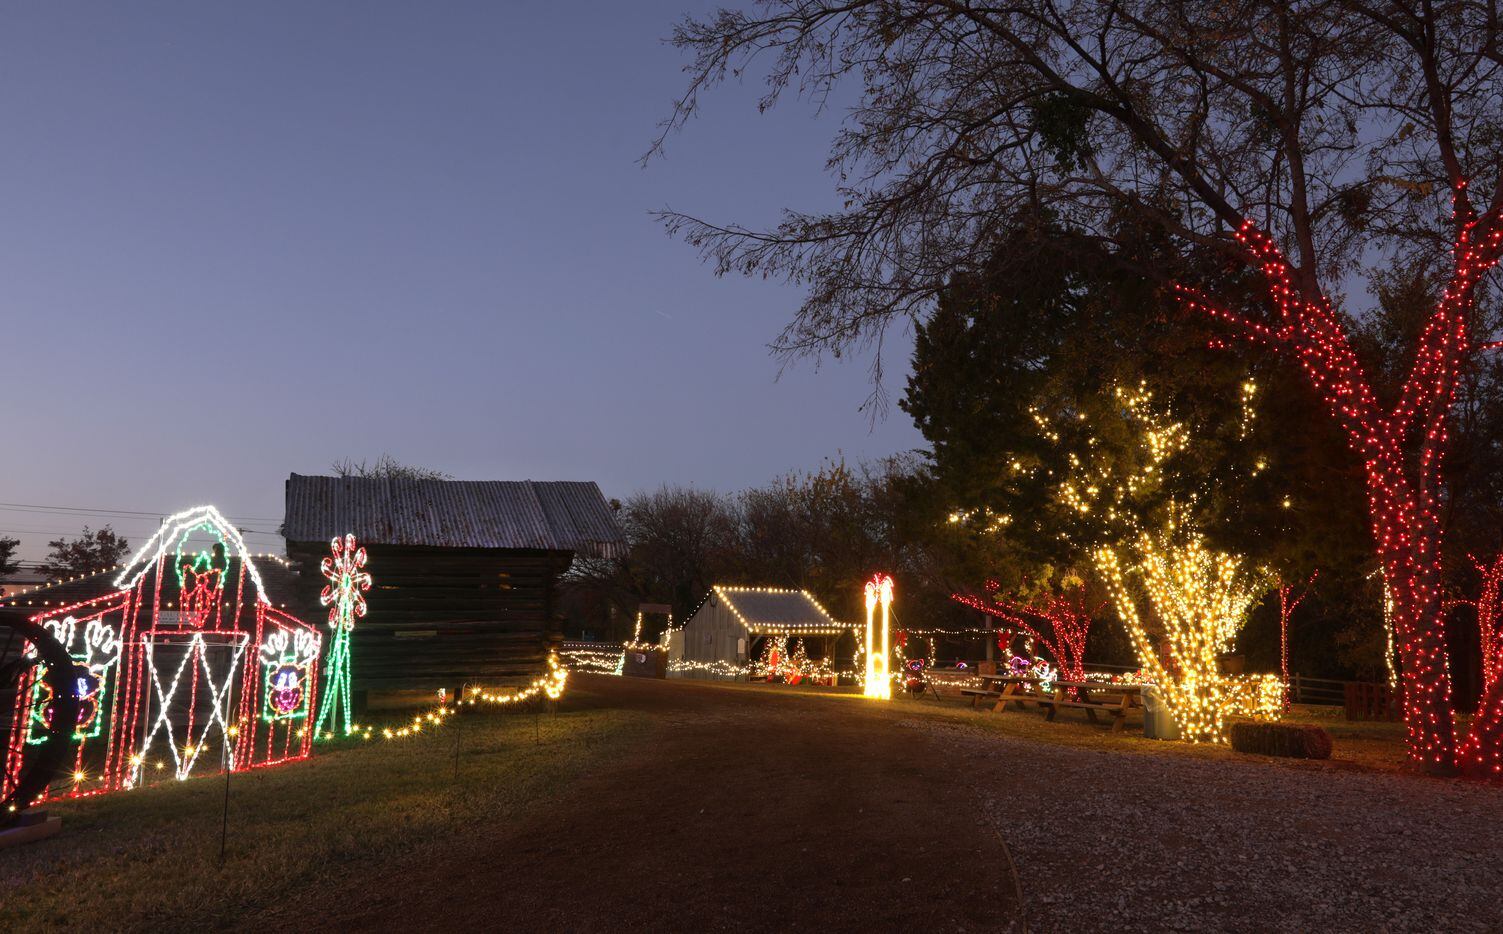 Heritage Farmstead Museum's Lights on the Farm in Plano includes more than a million lights along a quarter-mile trail with a 20-foot-tall Christmas tree and animated displays.